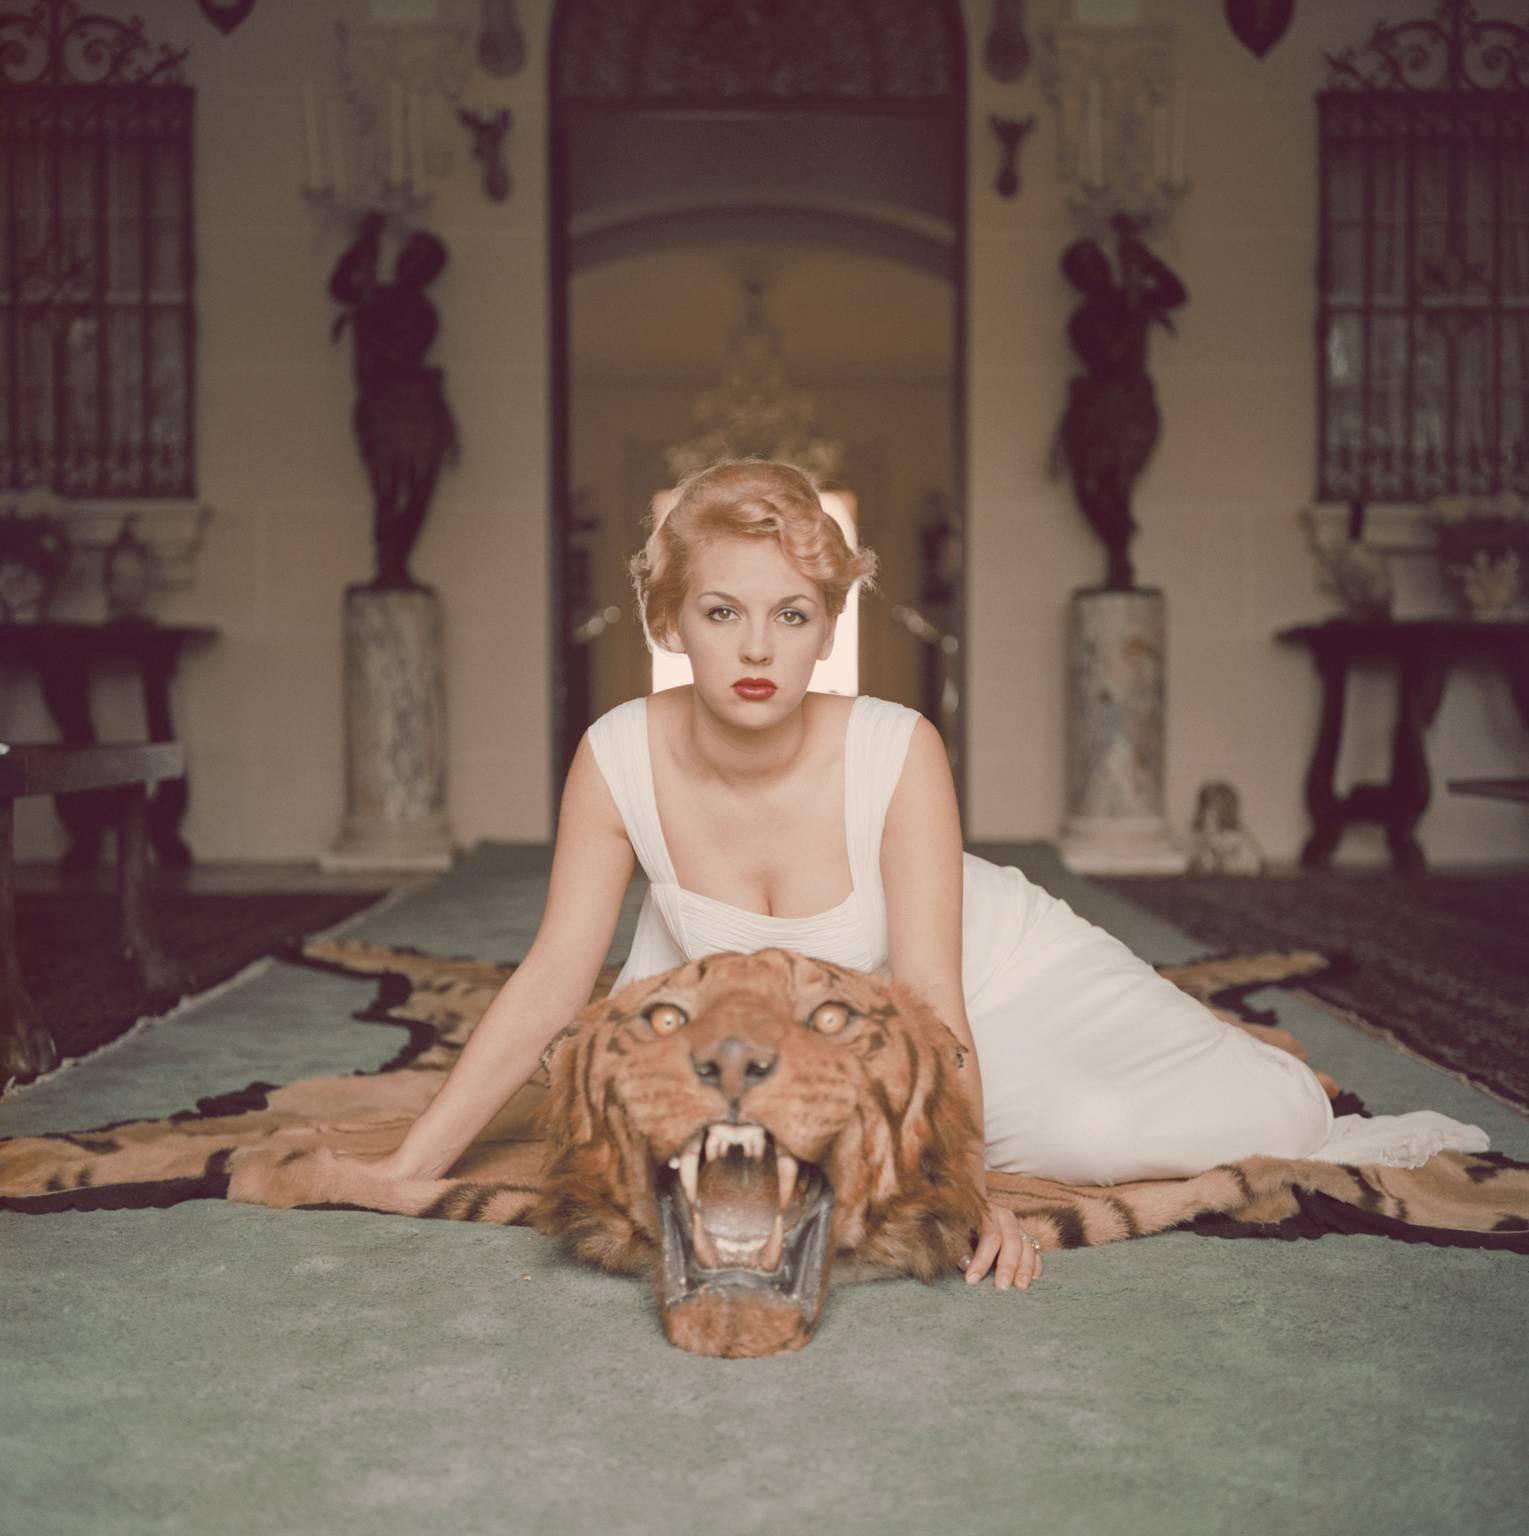 Slim Aarons Figurative Photograph - 'Beauty And The Beast' Palm Beach  (Archival Pigment Print)